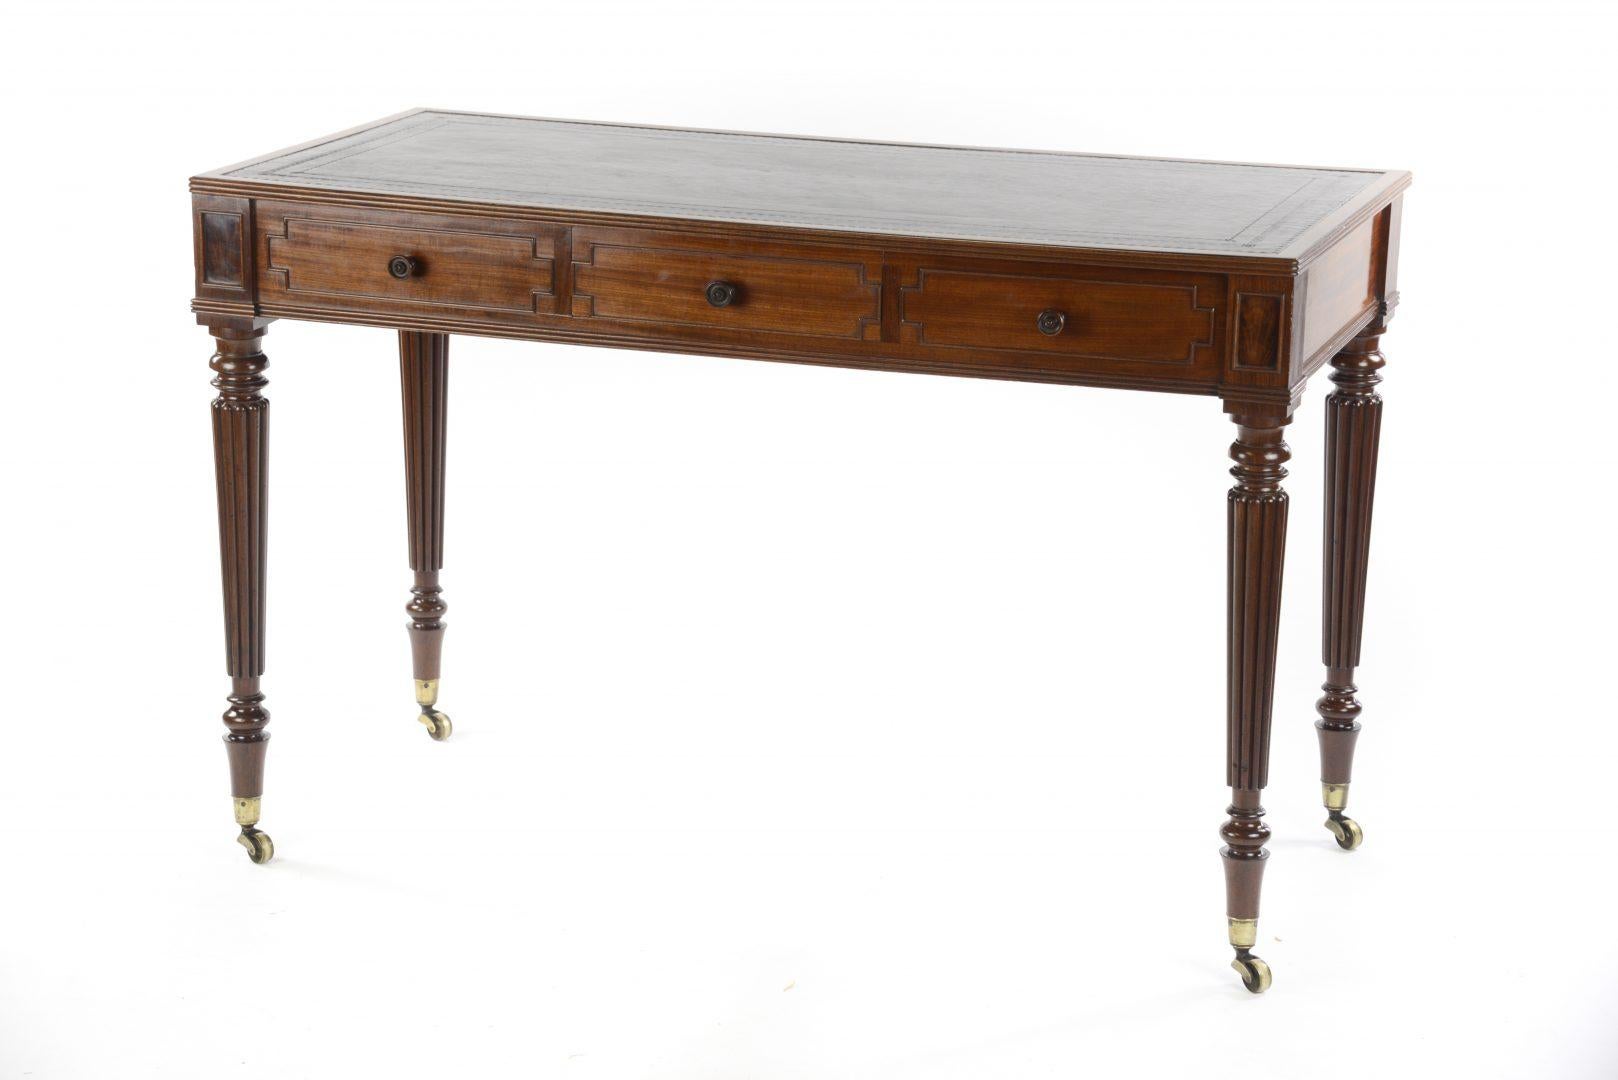 George IV Gillows mahogany writing table circa 1825, fitted with two dummy draws and one central draw, signed Gillows of Lancaster.

Gillows of Lancaster and London, also known as Gillow & Co., was an English furniture making firm based in